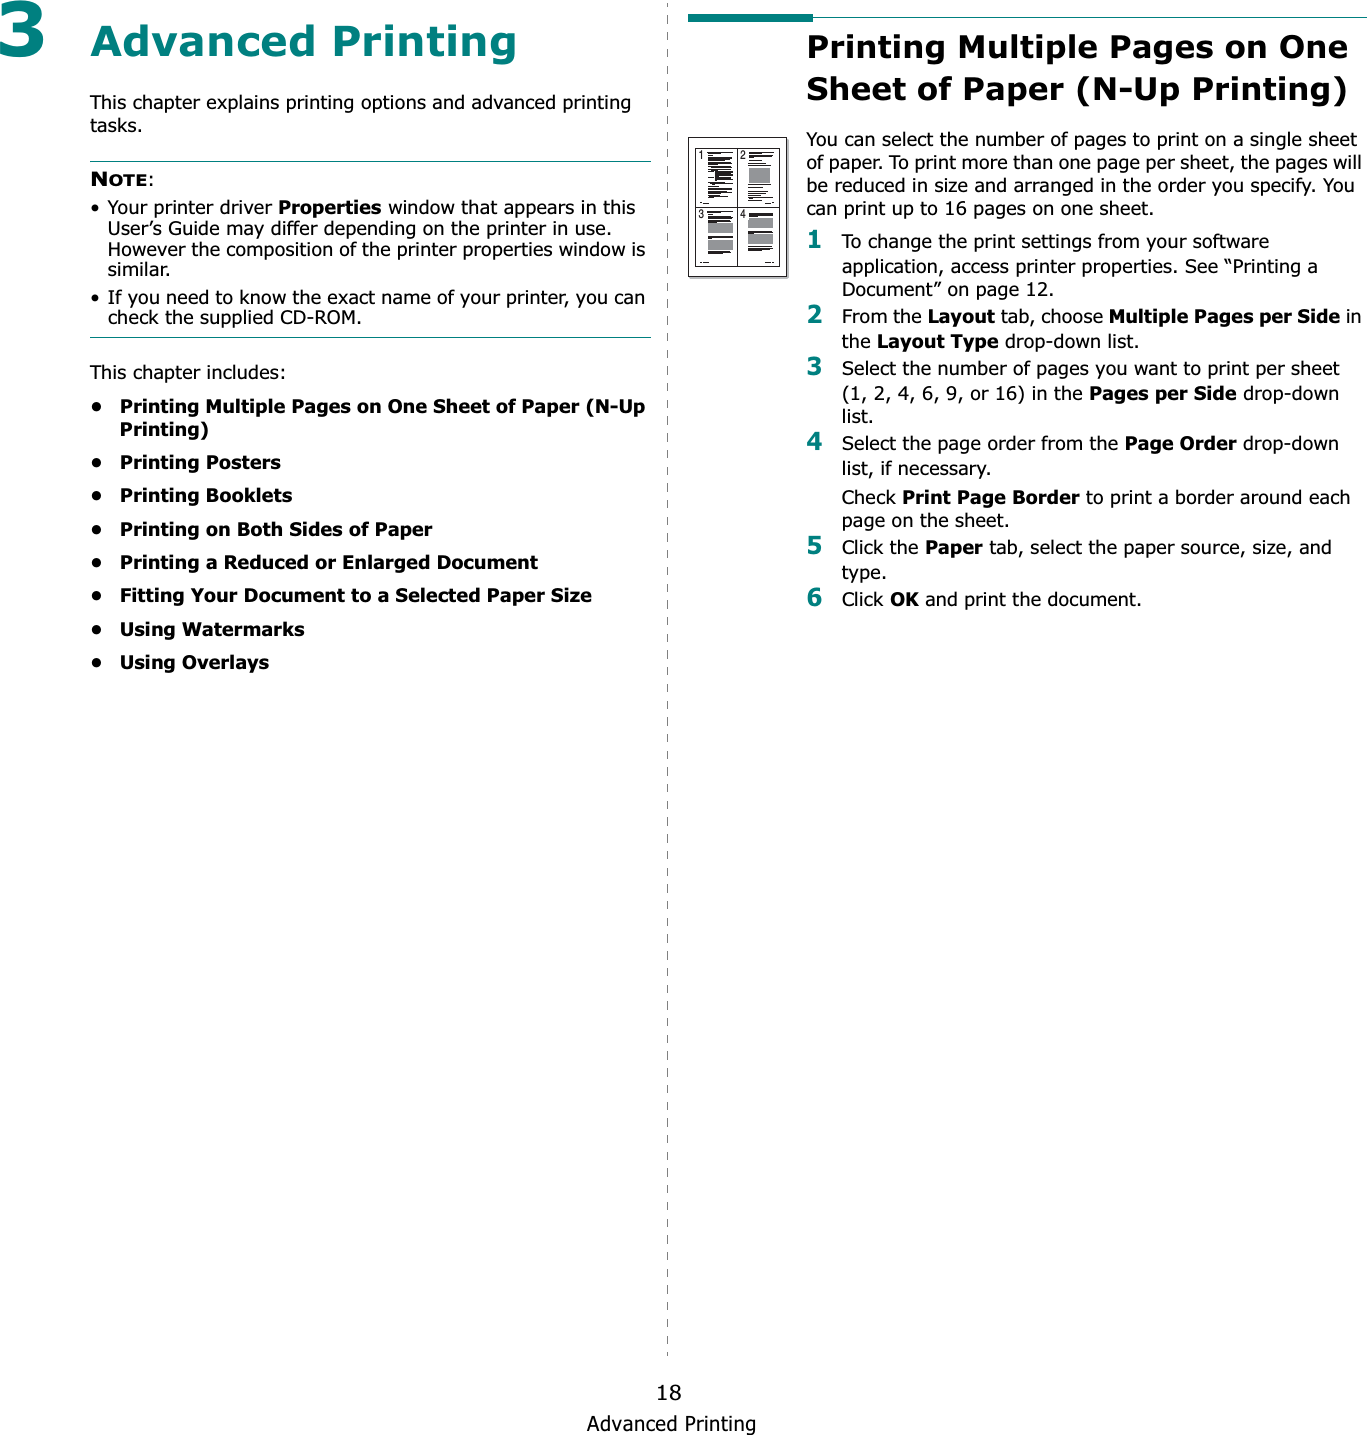 Advanced Printing183Advanced PrintingThis chapter explains printing options and advanced printing tasks. NOTE:• Your printer driver Properties window that appears in this User’s Guide may differ depending on the printer in use. However the composition of the printer properties window is similar.• If you need to know the exact name of your printer, you can check the supplied CD-ROM.This chapter includes:• Printing Multiple Pages on One Sheet of Paper (N-Up Printing)•Printing Posters• Printing Booklets• Printing on Both Sides of Paper• Printing a Reduced or Enlarged Document• Fitting Your Document to a Selected Paper Size•Using Watermarks•Using OverlaysPrinting Multiple Pages on One Sheet of Paper (N-Up Printing) You can select the number of pages to print on a single sheet of paper. To print more than one page per sheet, the pages will be reduced in size and arranged in the order you specify. You can print up to 16 pages on one sheet.  1To change the print settings from your software application, access printer properties. See “Printing a Document” on page 12.2From the Layout tab, choose Multiple Pages per Side in the Layout Type drop-down list. 3Select the number of pages you want to print per sheet (1, 2, 4, 6, 9, or 16) in the Pages per Side drop-down list.4Select the page order from the Page Order drop-down list, if necessary.Check Print Page Border to print a border around each page on the sheet. 5Click the Paper tab, select the paper source, size, and type.6Click OK and print the document. 1 23 4